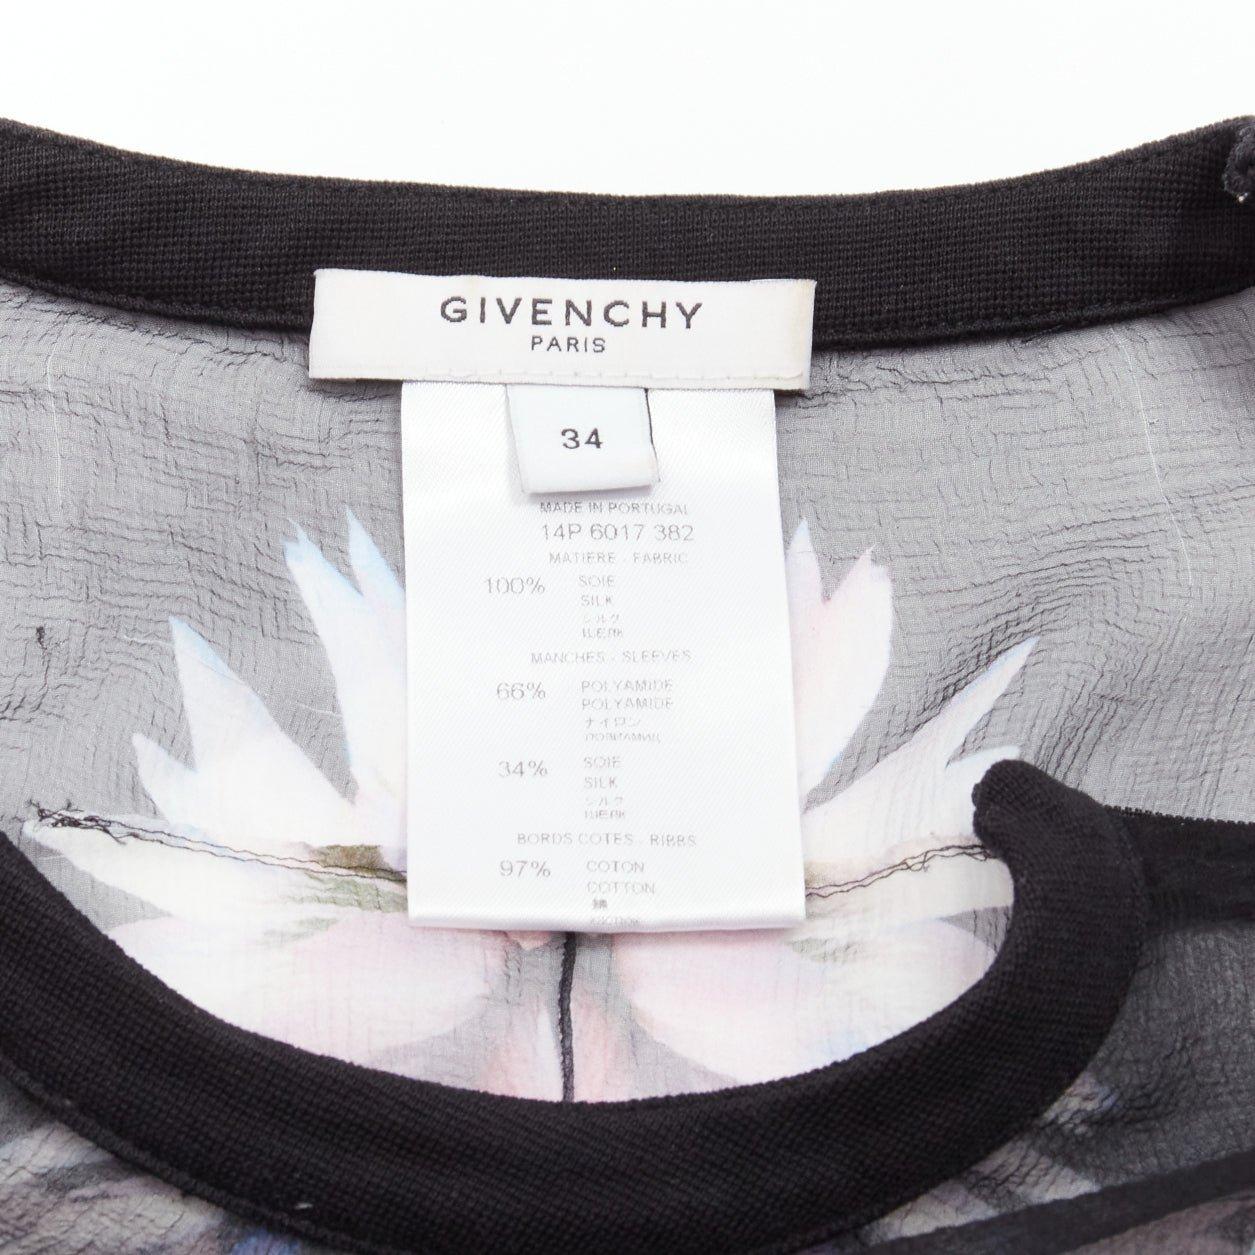 GIVENCHY RICCARDO TISCI red black floral sheer romantic goth tshirt FR34 XS For Sale 3